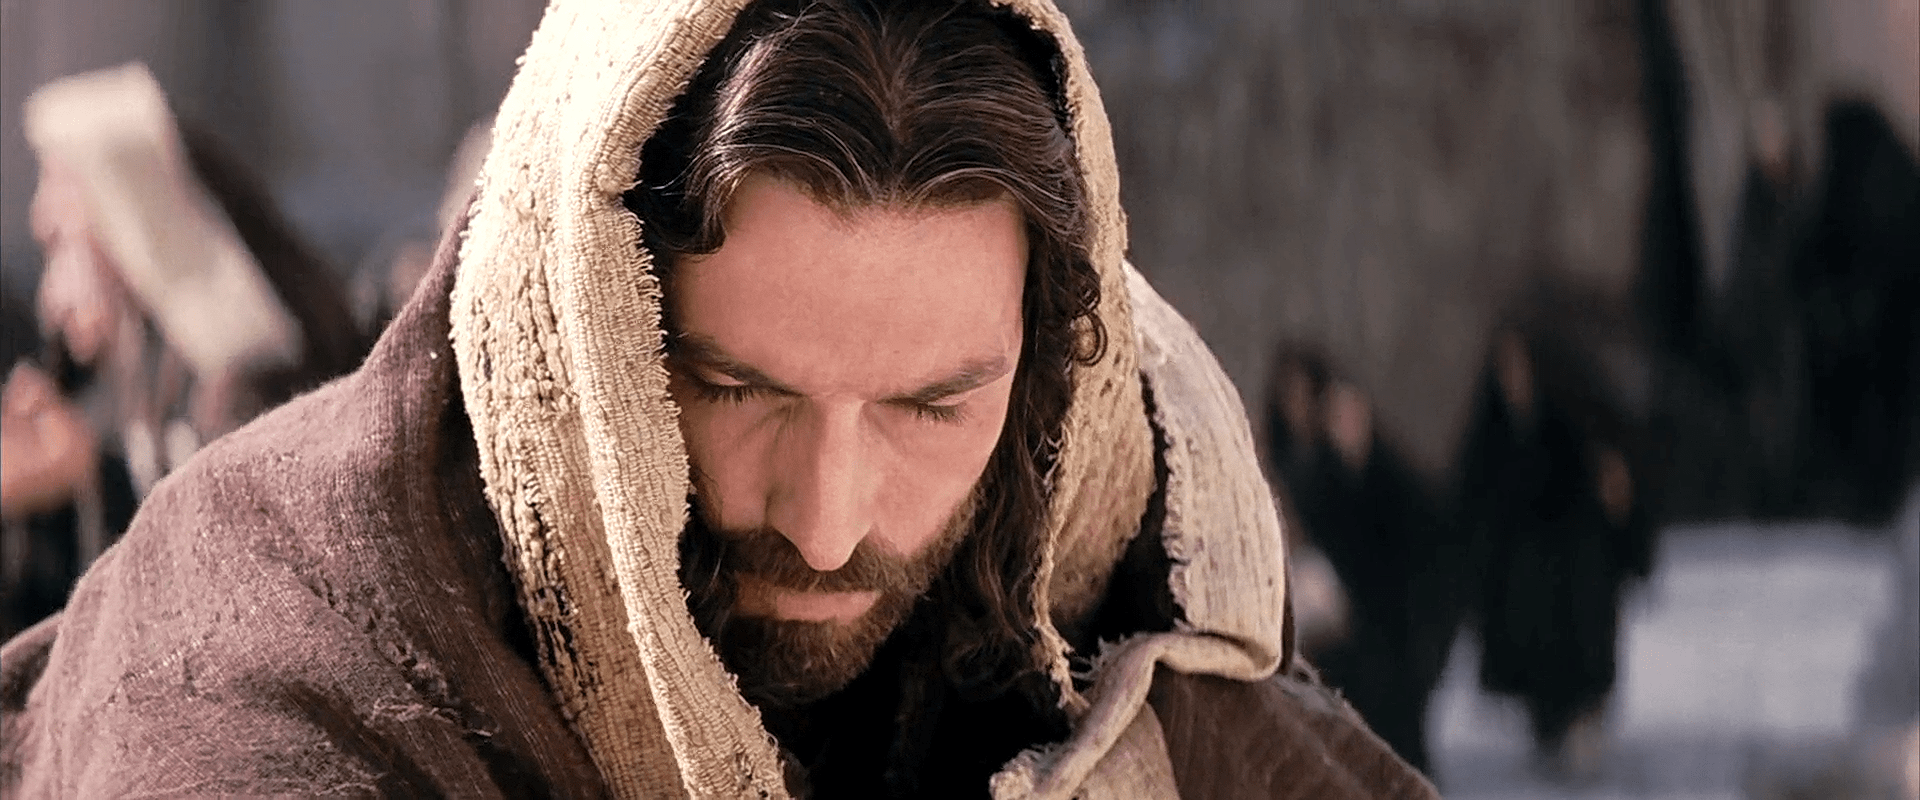 watch passion of the christ free download